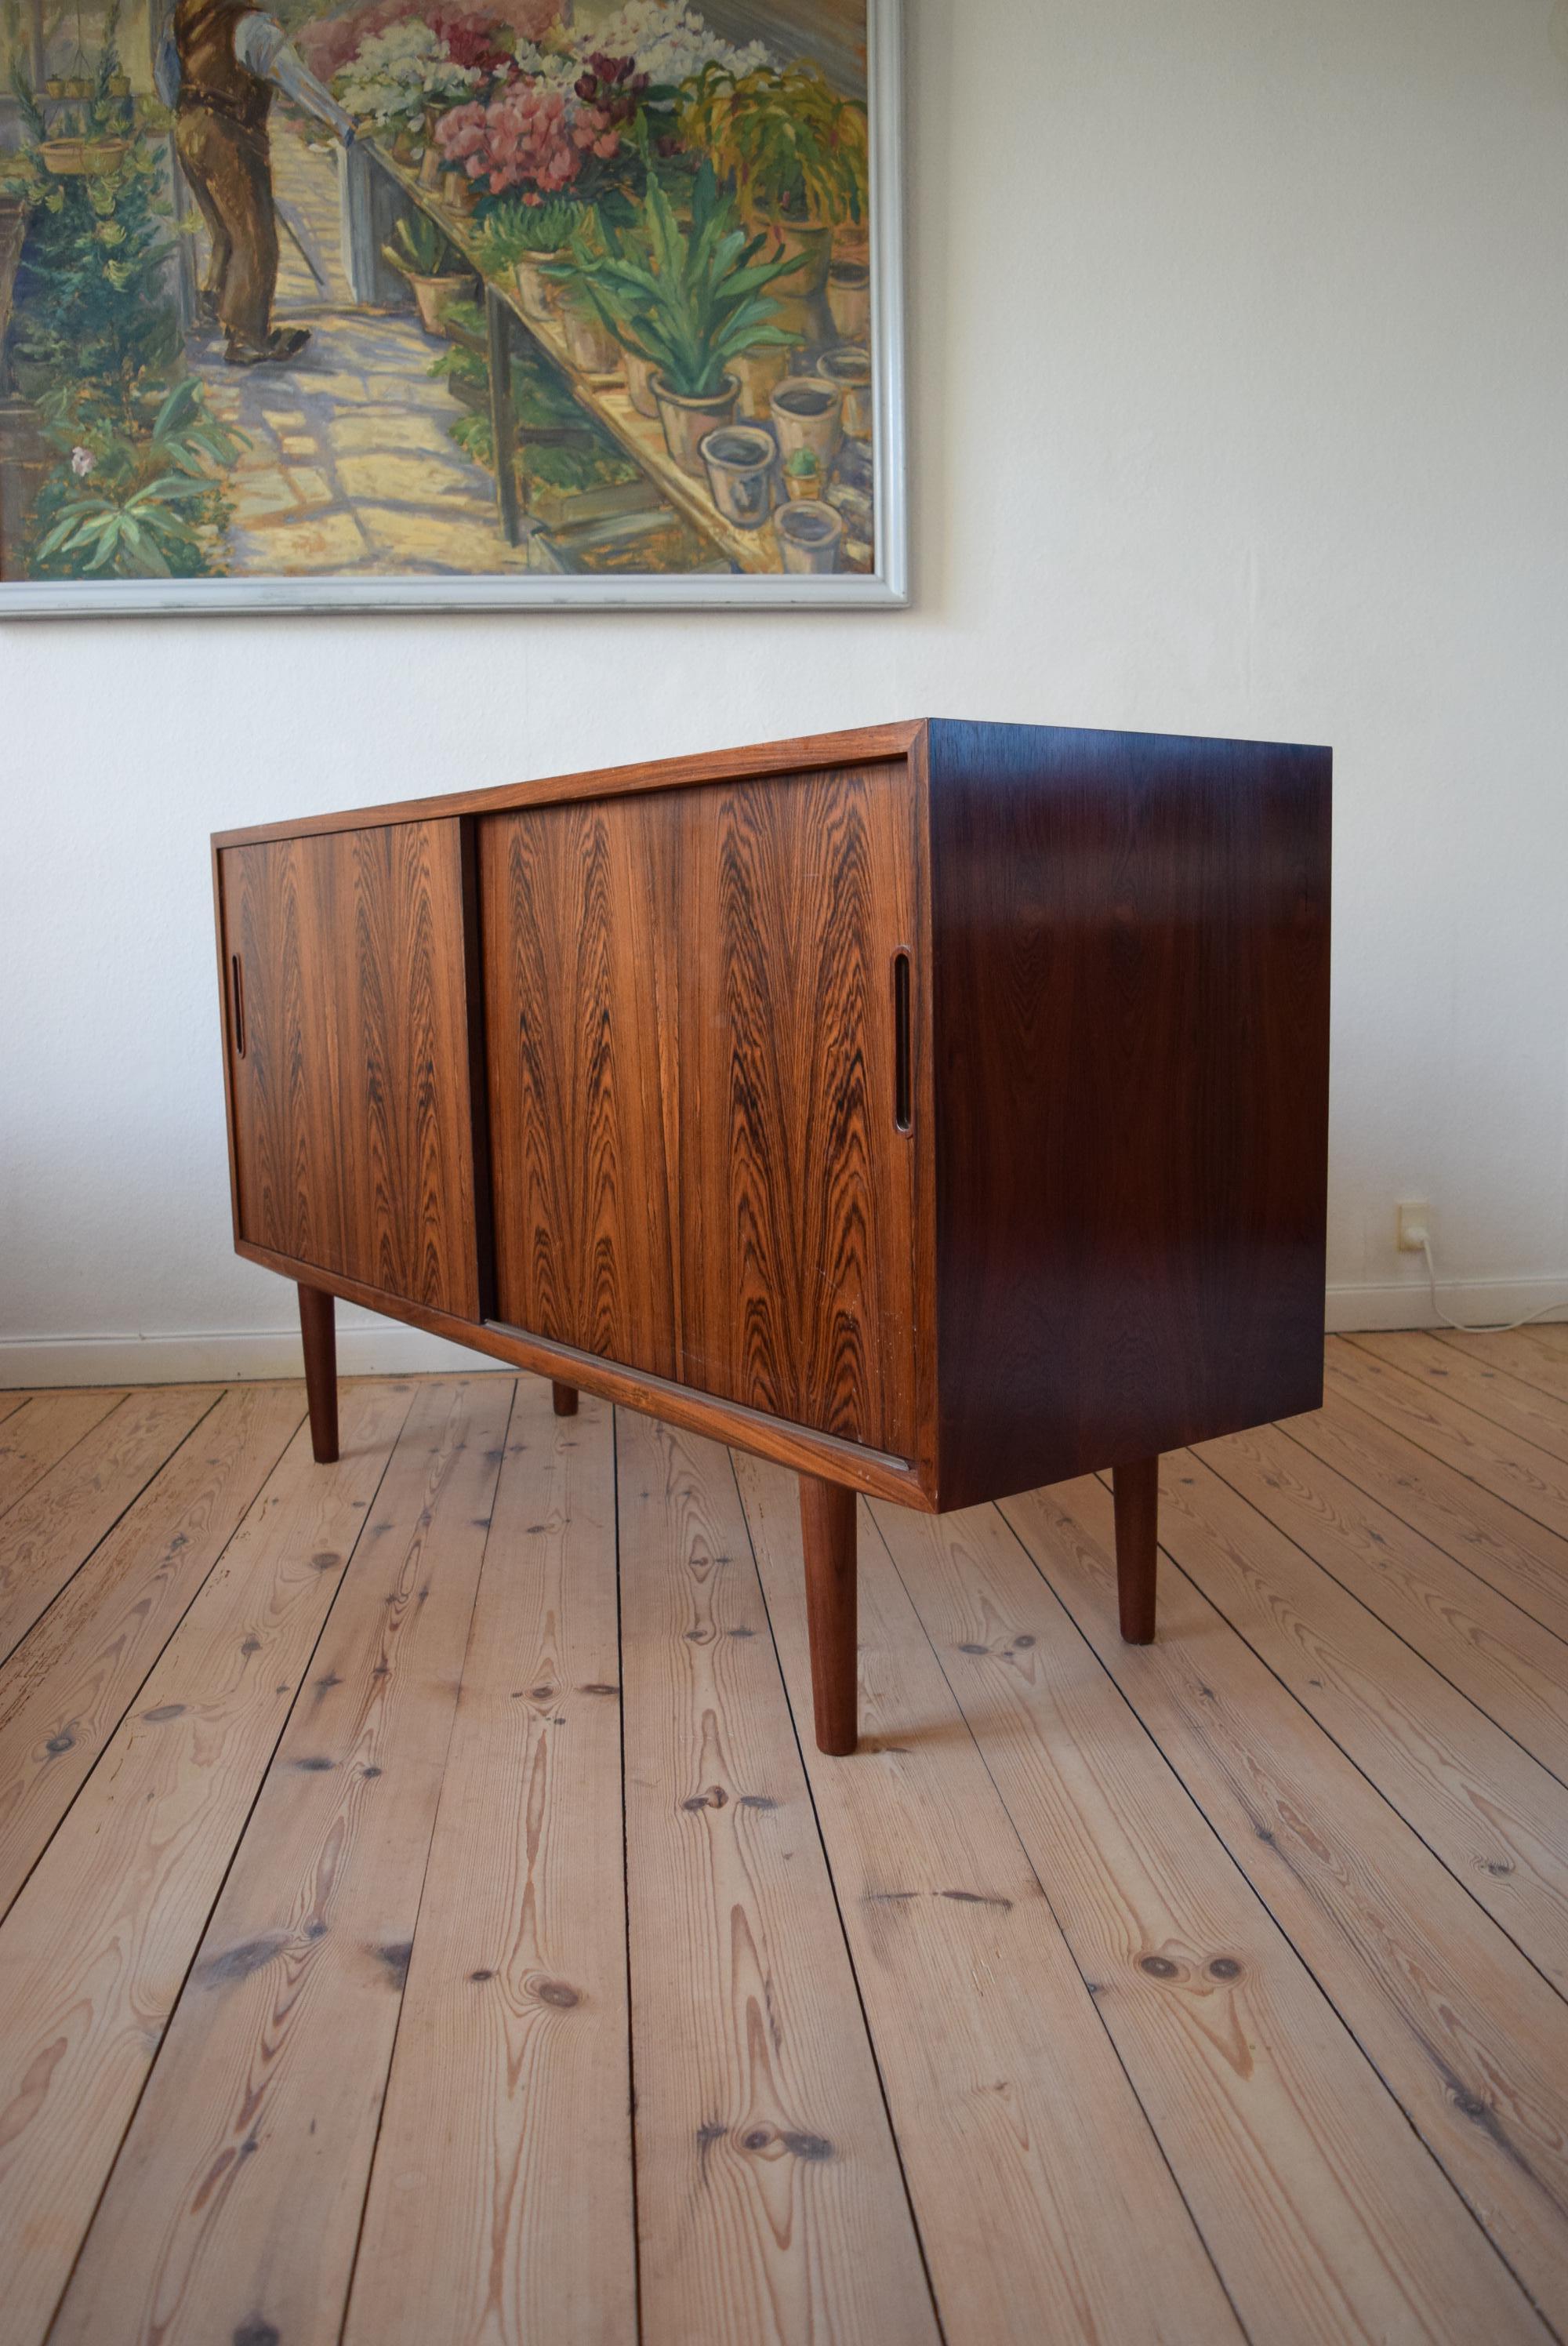 Danish Midcentury Rosewood Sideboard by Poul Hundevad, 1960s For Sale 4